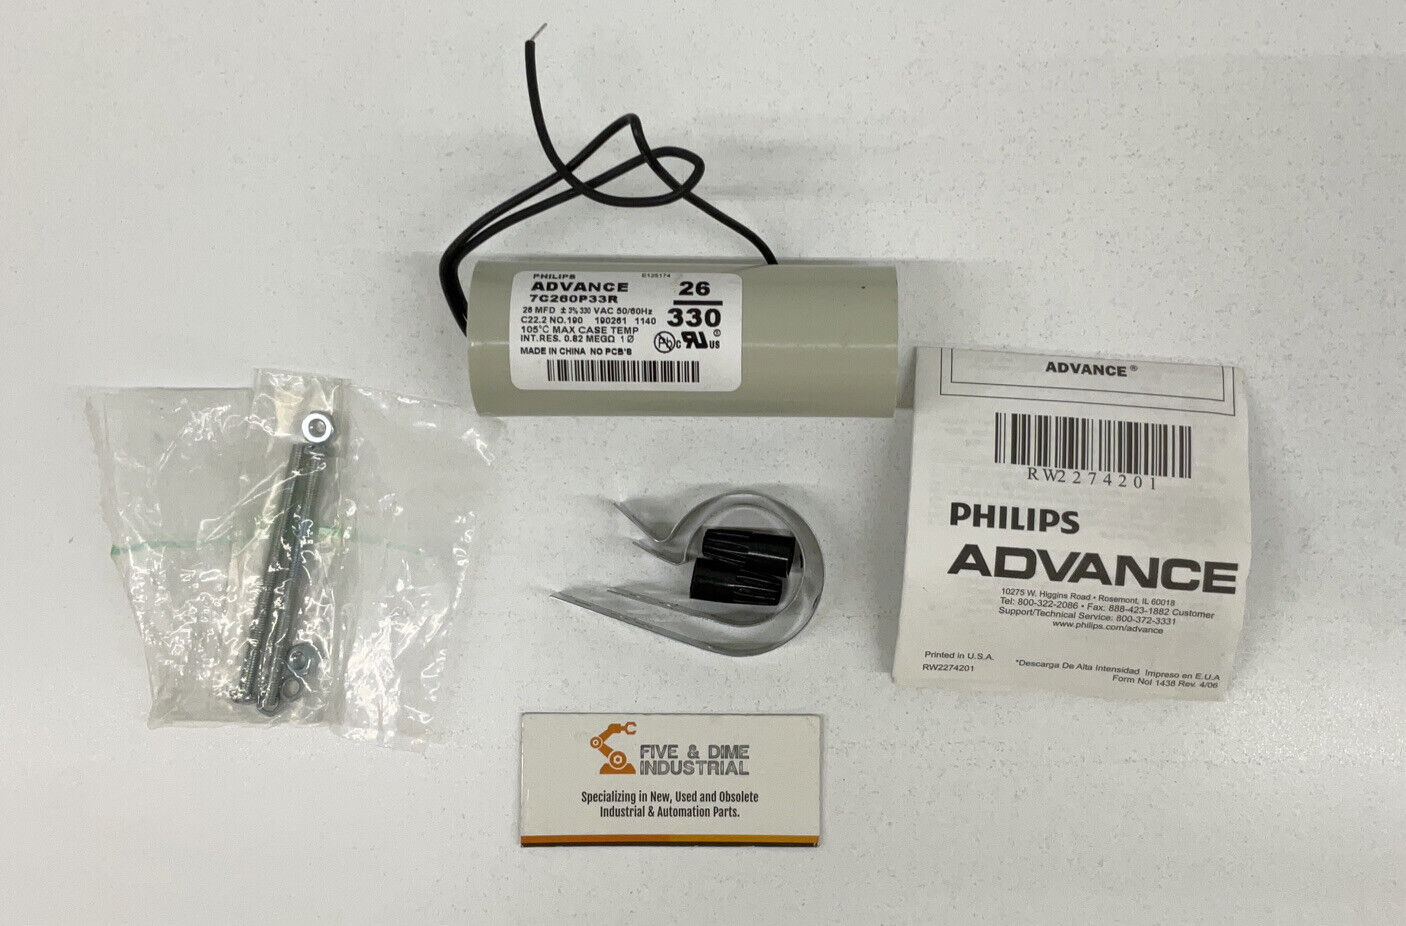 Philips Advance RW2274201 Core & Coil H.I.D. Replacement Kit (BL161)